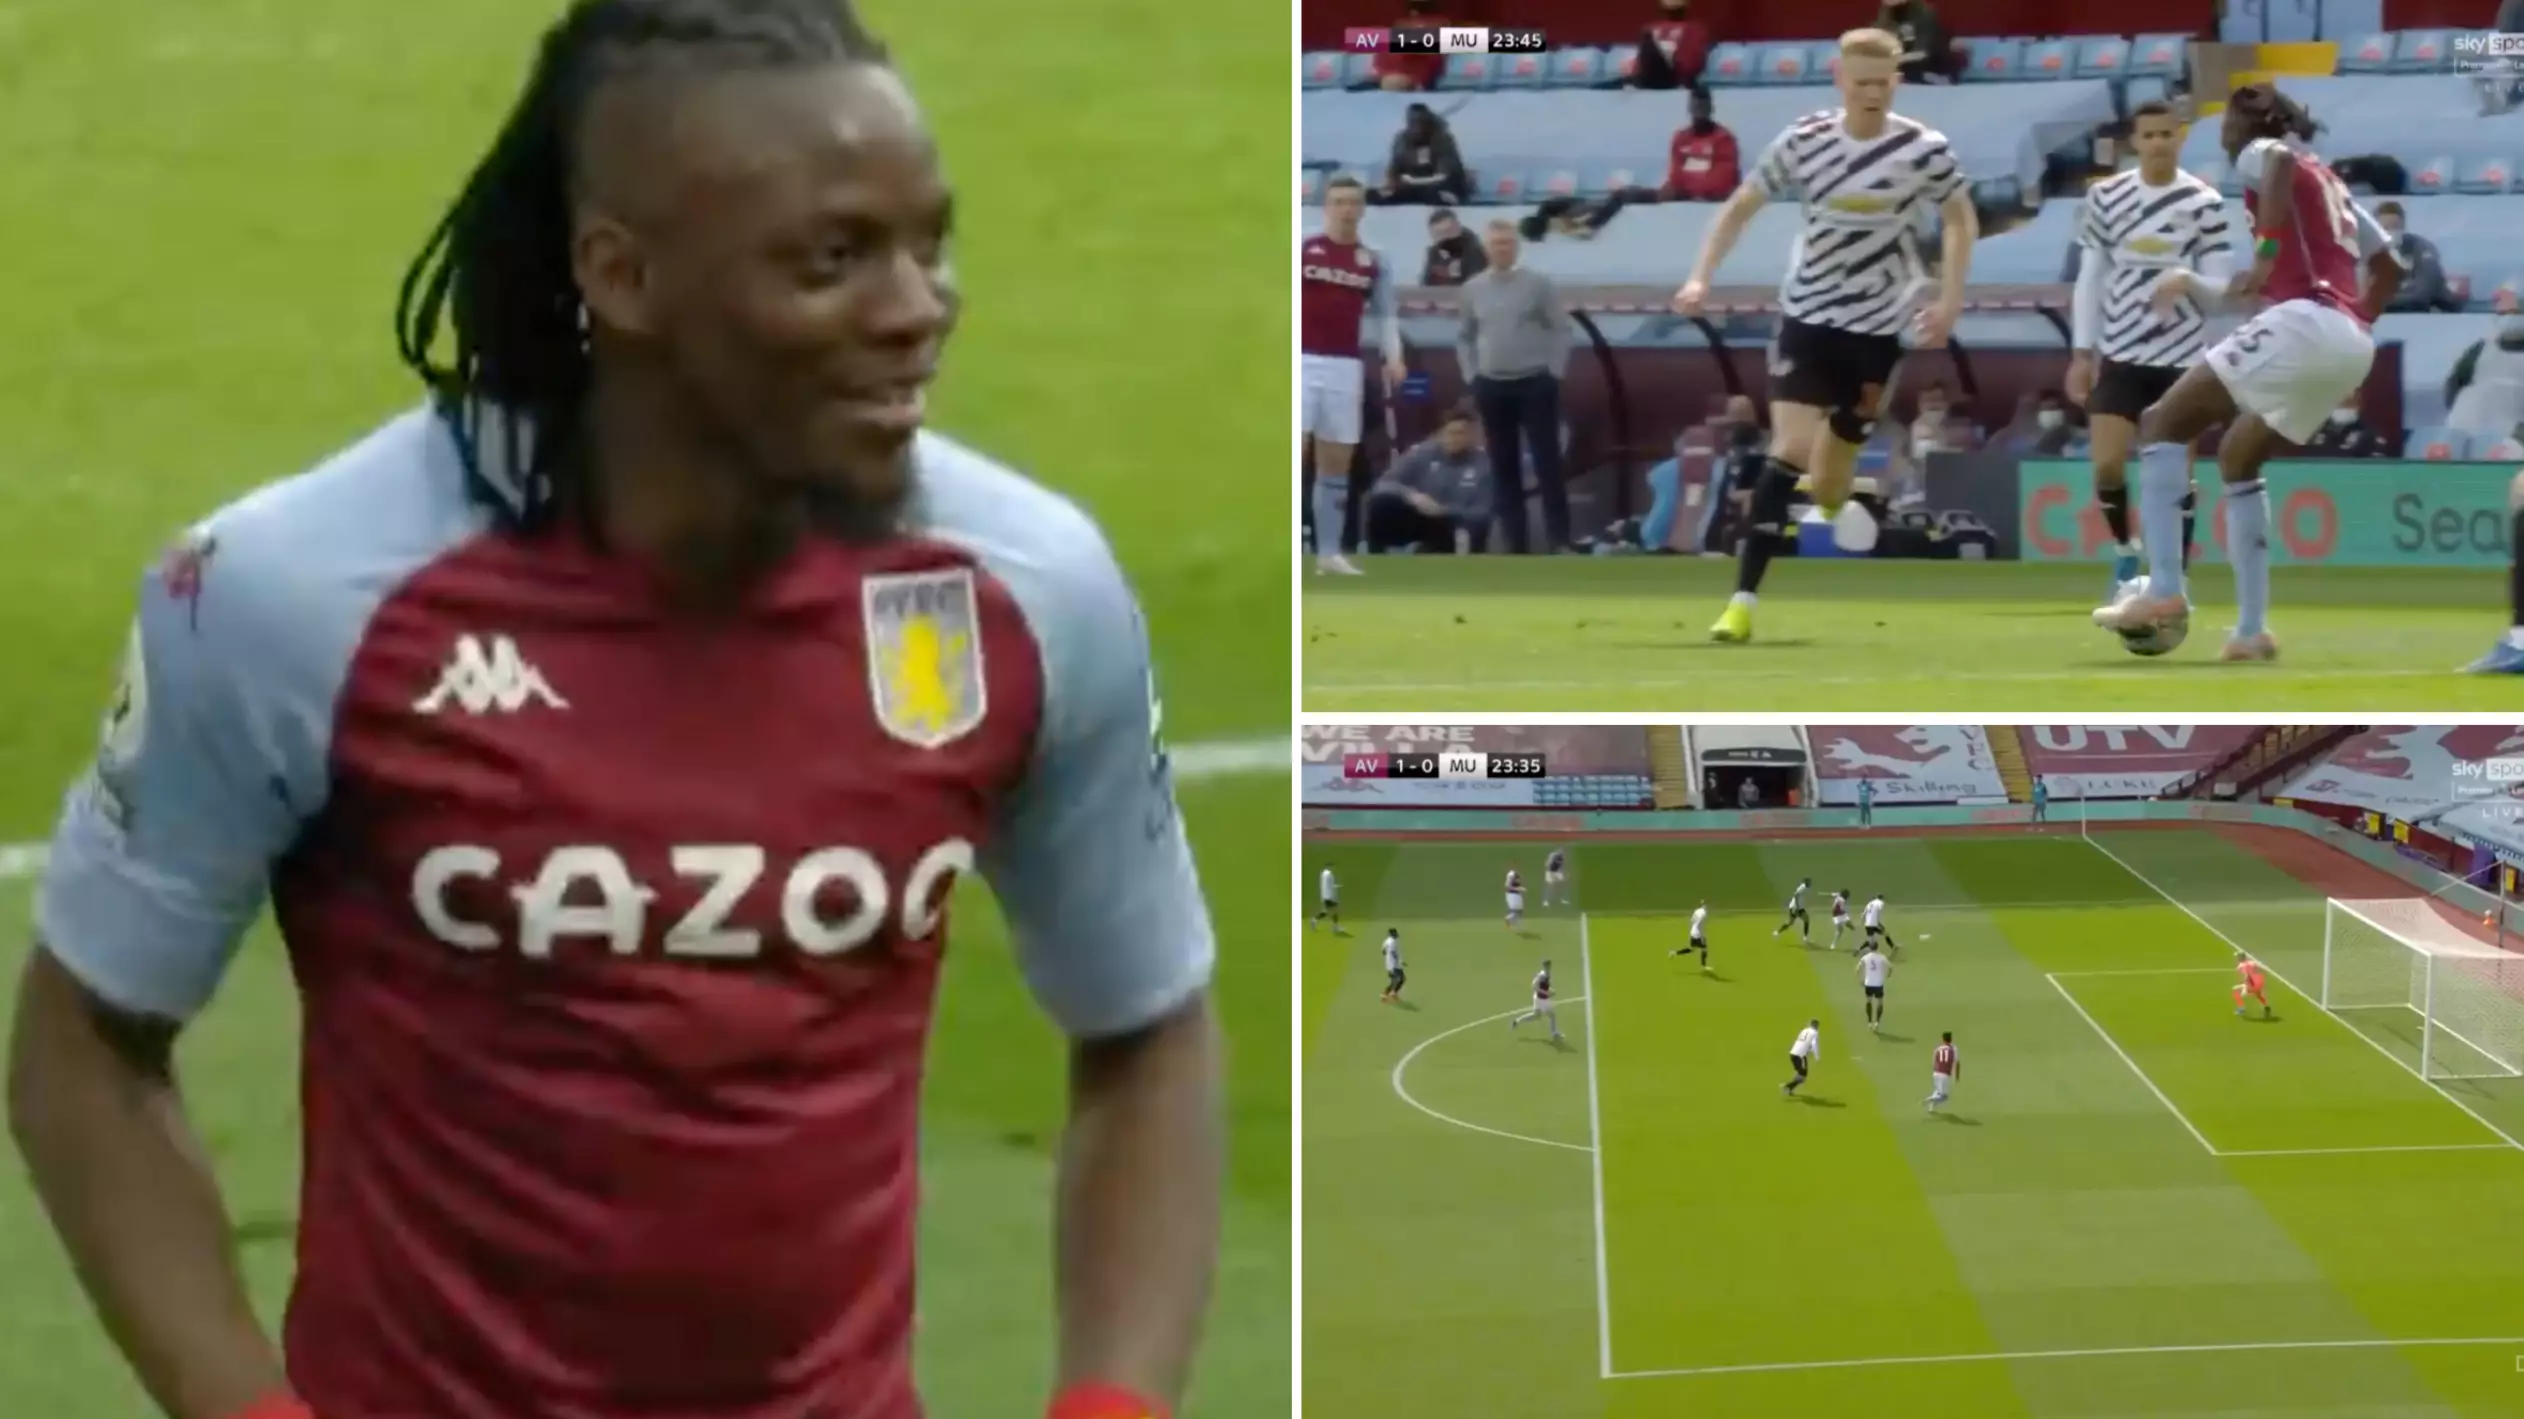 Bertrand Traore Picks Out Top Corner From A Very Tight Angle To Score Spectacular Goal